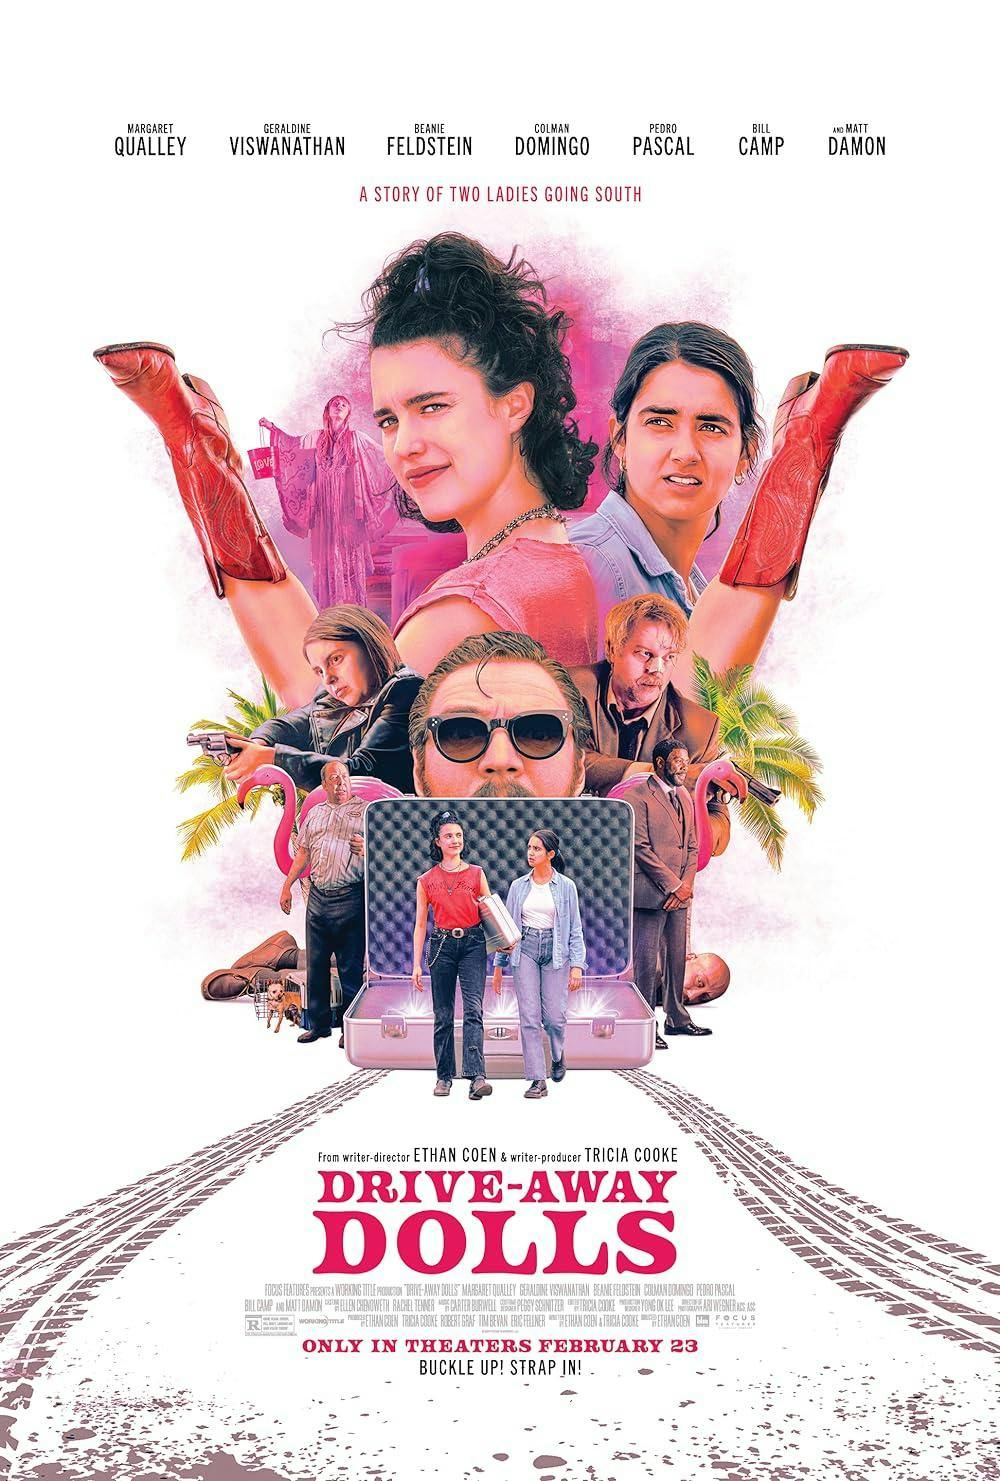 Review: 'Drive-Away Dolls' fails on every front